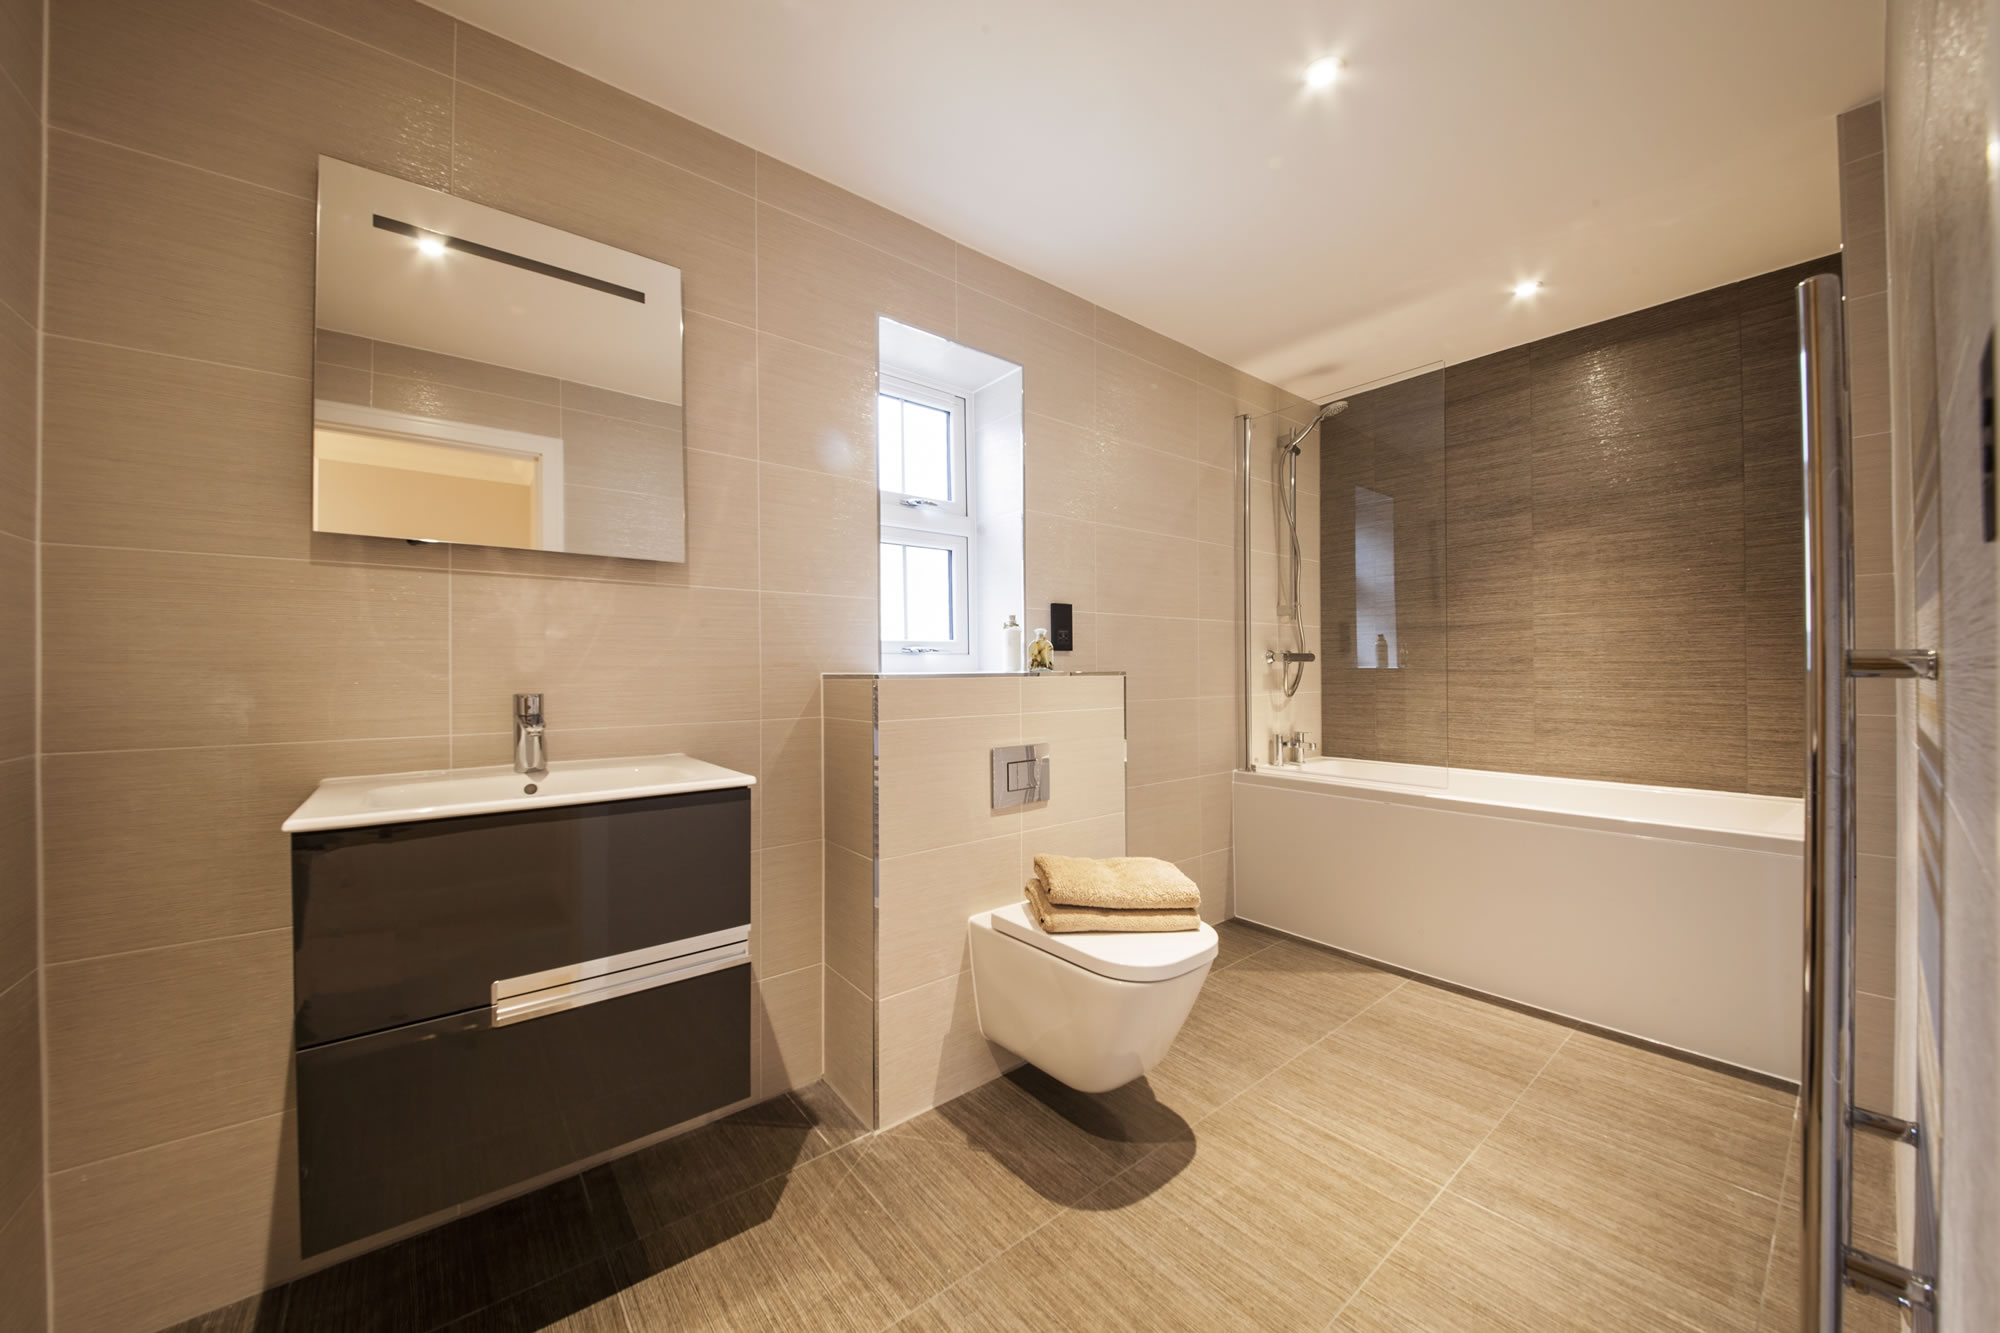 A fully fitted bathroom from Clarendon Homes